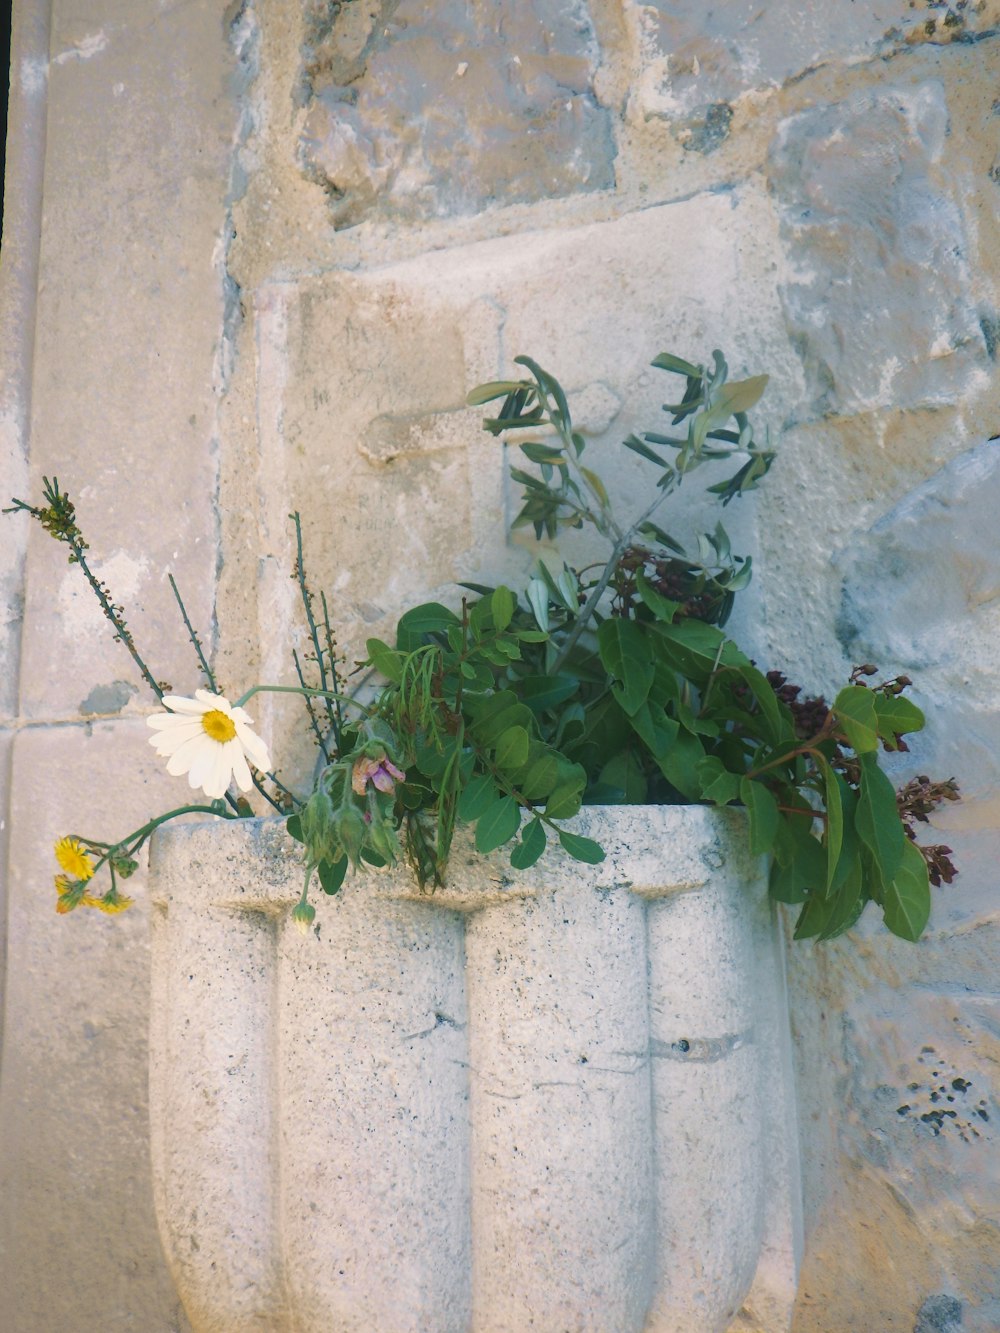 a planter with flowers in it sitting on a stone wall